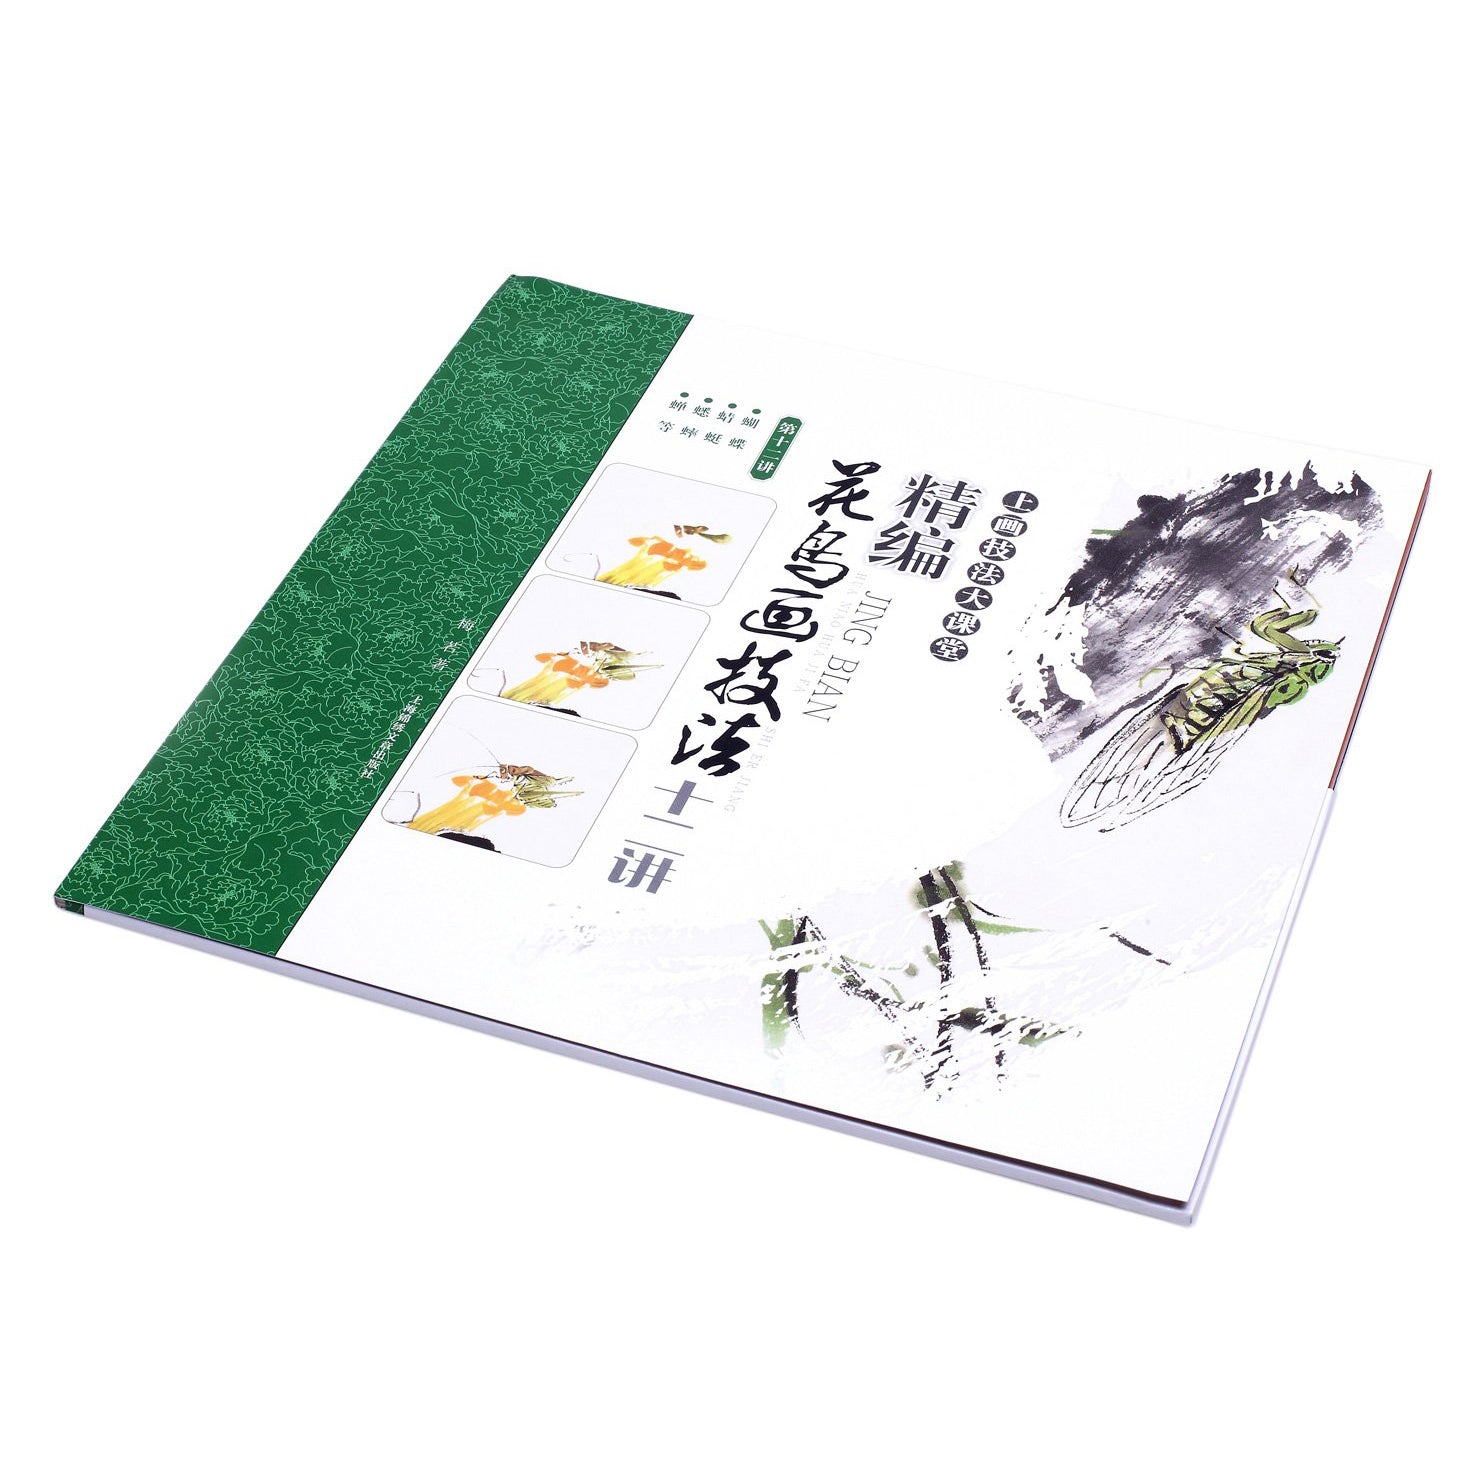 Deck entirely dedicated to helping you paint insects, this deck of painting cards is all about butterflies, dragonflies, crickets and cicada